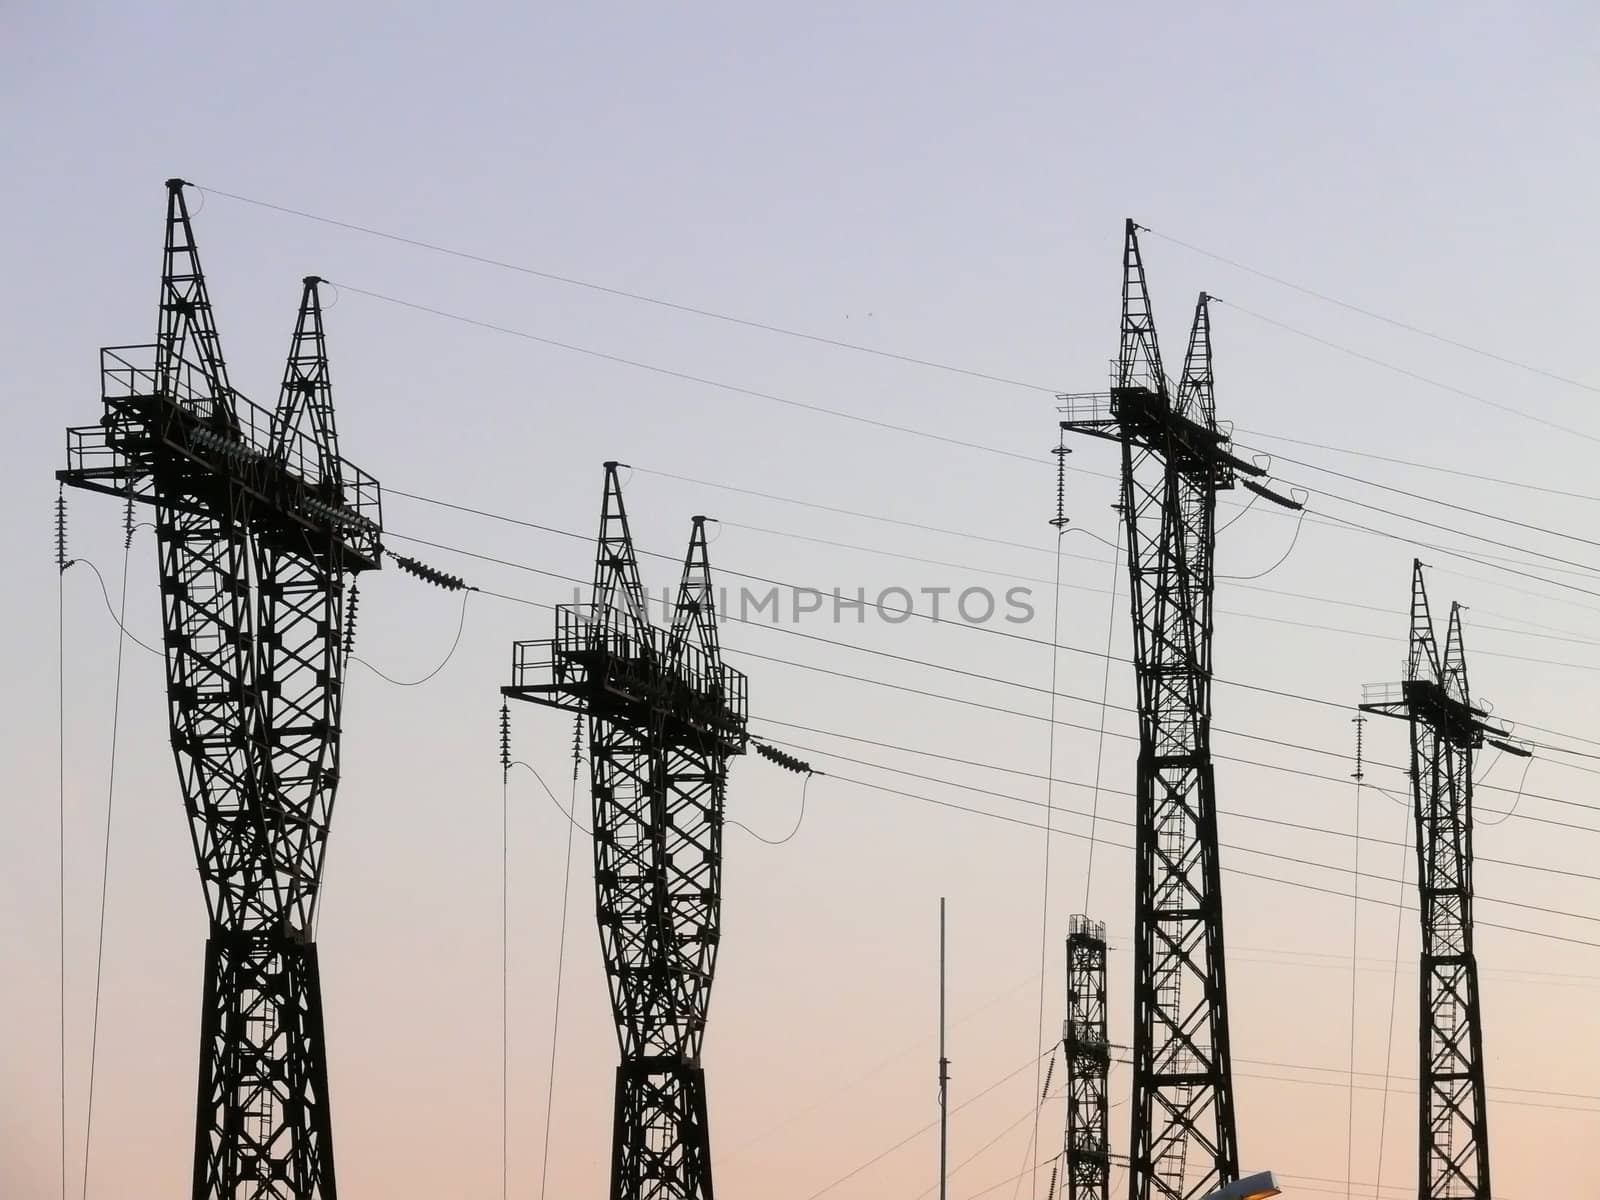 Rows of electricity pylons in bright sunshine